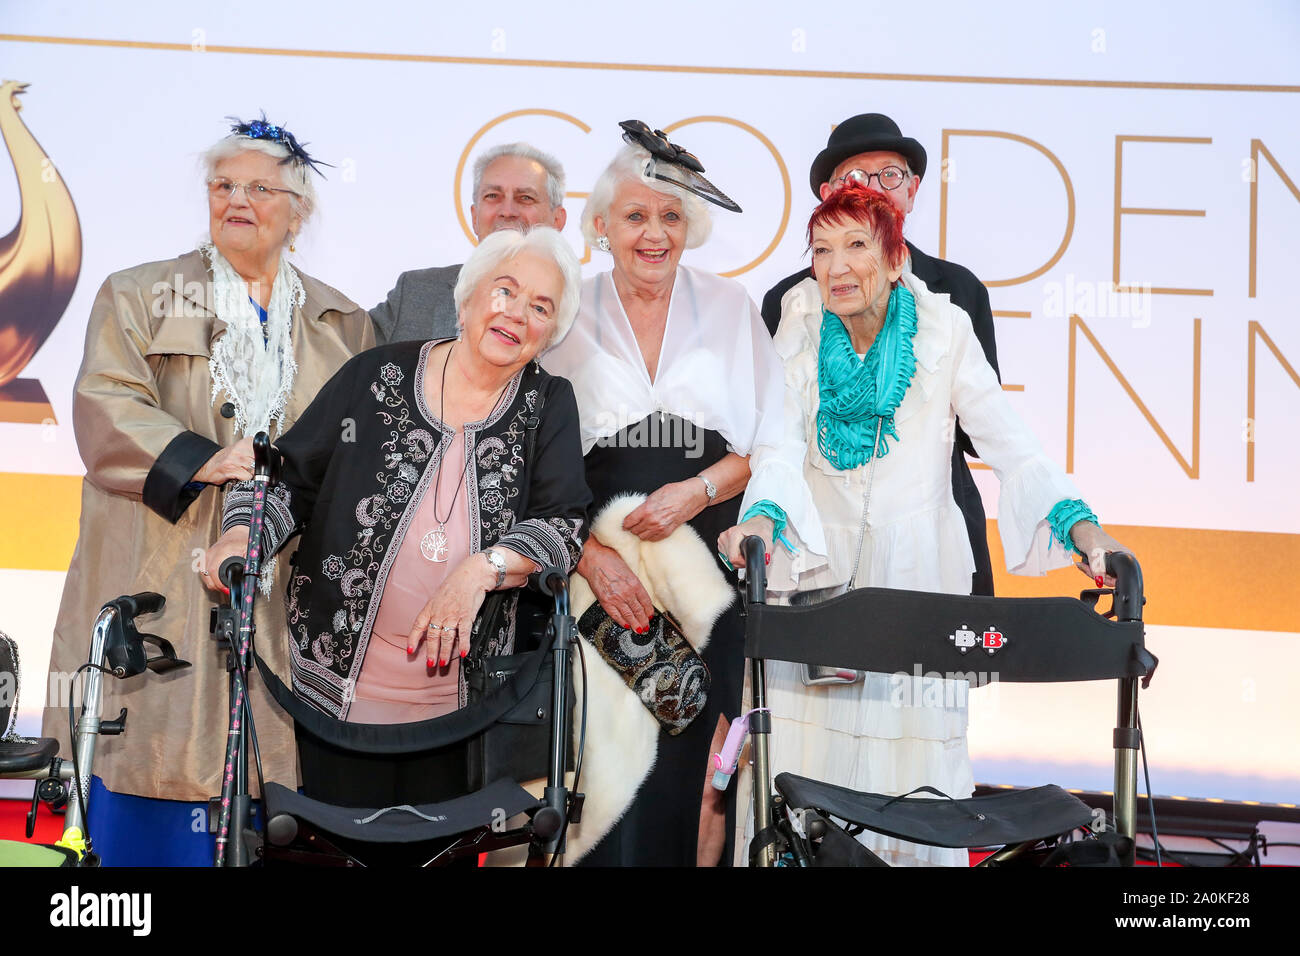 Leipzig, Germany. 20th Sep, 2019. The 'Seniors Gambling' come to the television gala 'Golden Hen'. A total of 53 nominees from show business, society and sport can hope for the award. The Golden Hen is dedicated to the GDR entertainer Hahnemann, who died in 1991. Credit: Jan Woitas/dpa-Zentralbild/dpa/Alamy Live News Stock Photo